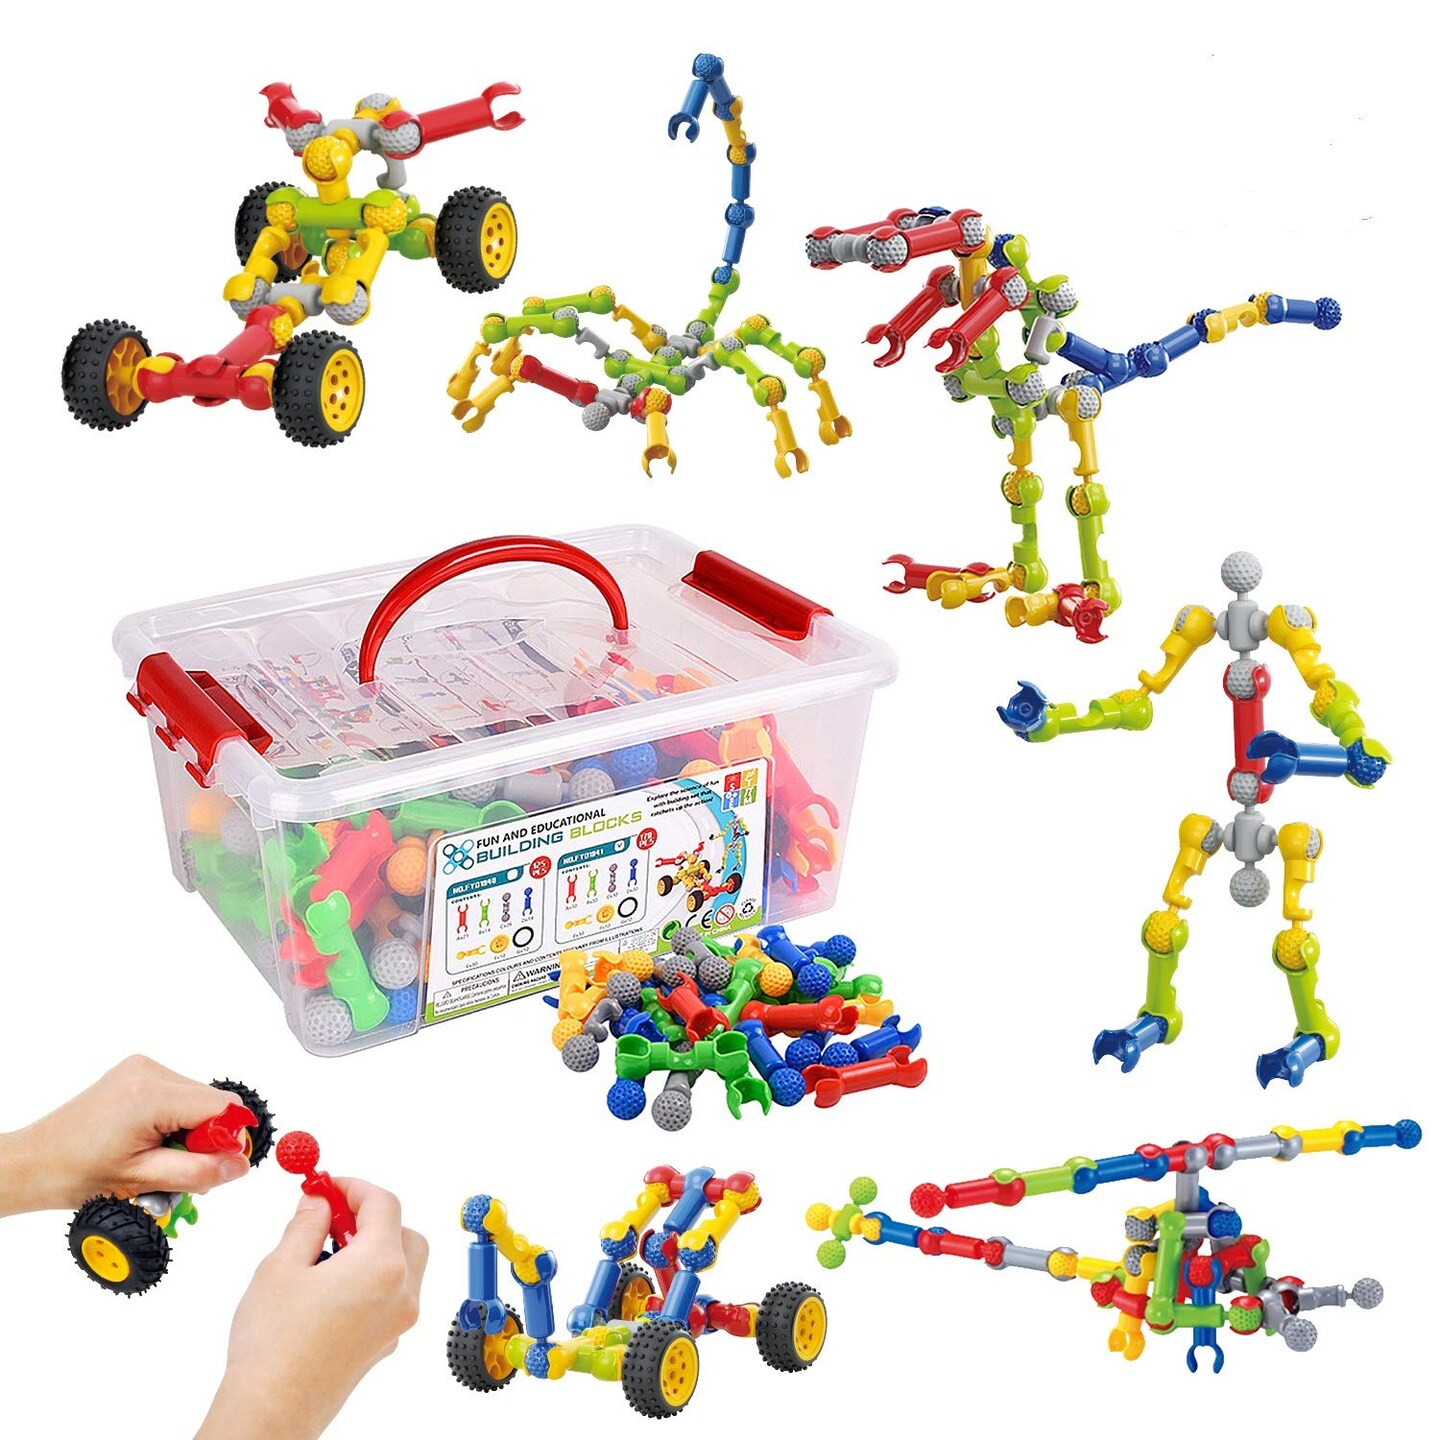 Huaker Kids Building STEM Toys,125 Pcs Educational Construction Engineering Building Blocks Kit for Ages 3 4 5 6 7 8 9 10 Year Old Boys and Girls,Best Gift for Kids Creative Games &#x26; Fun Activity